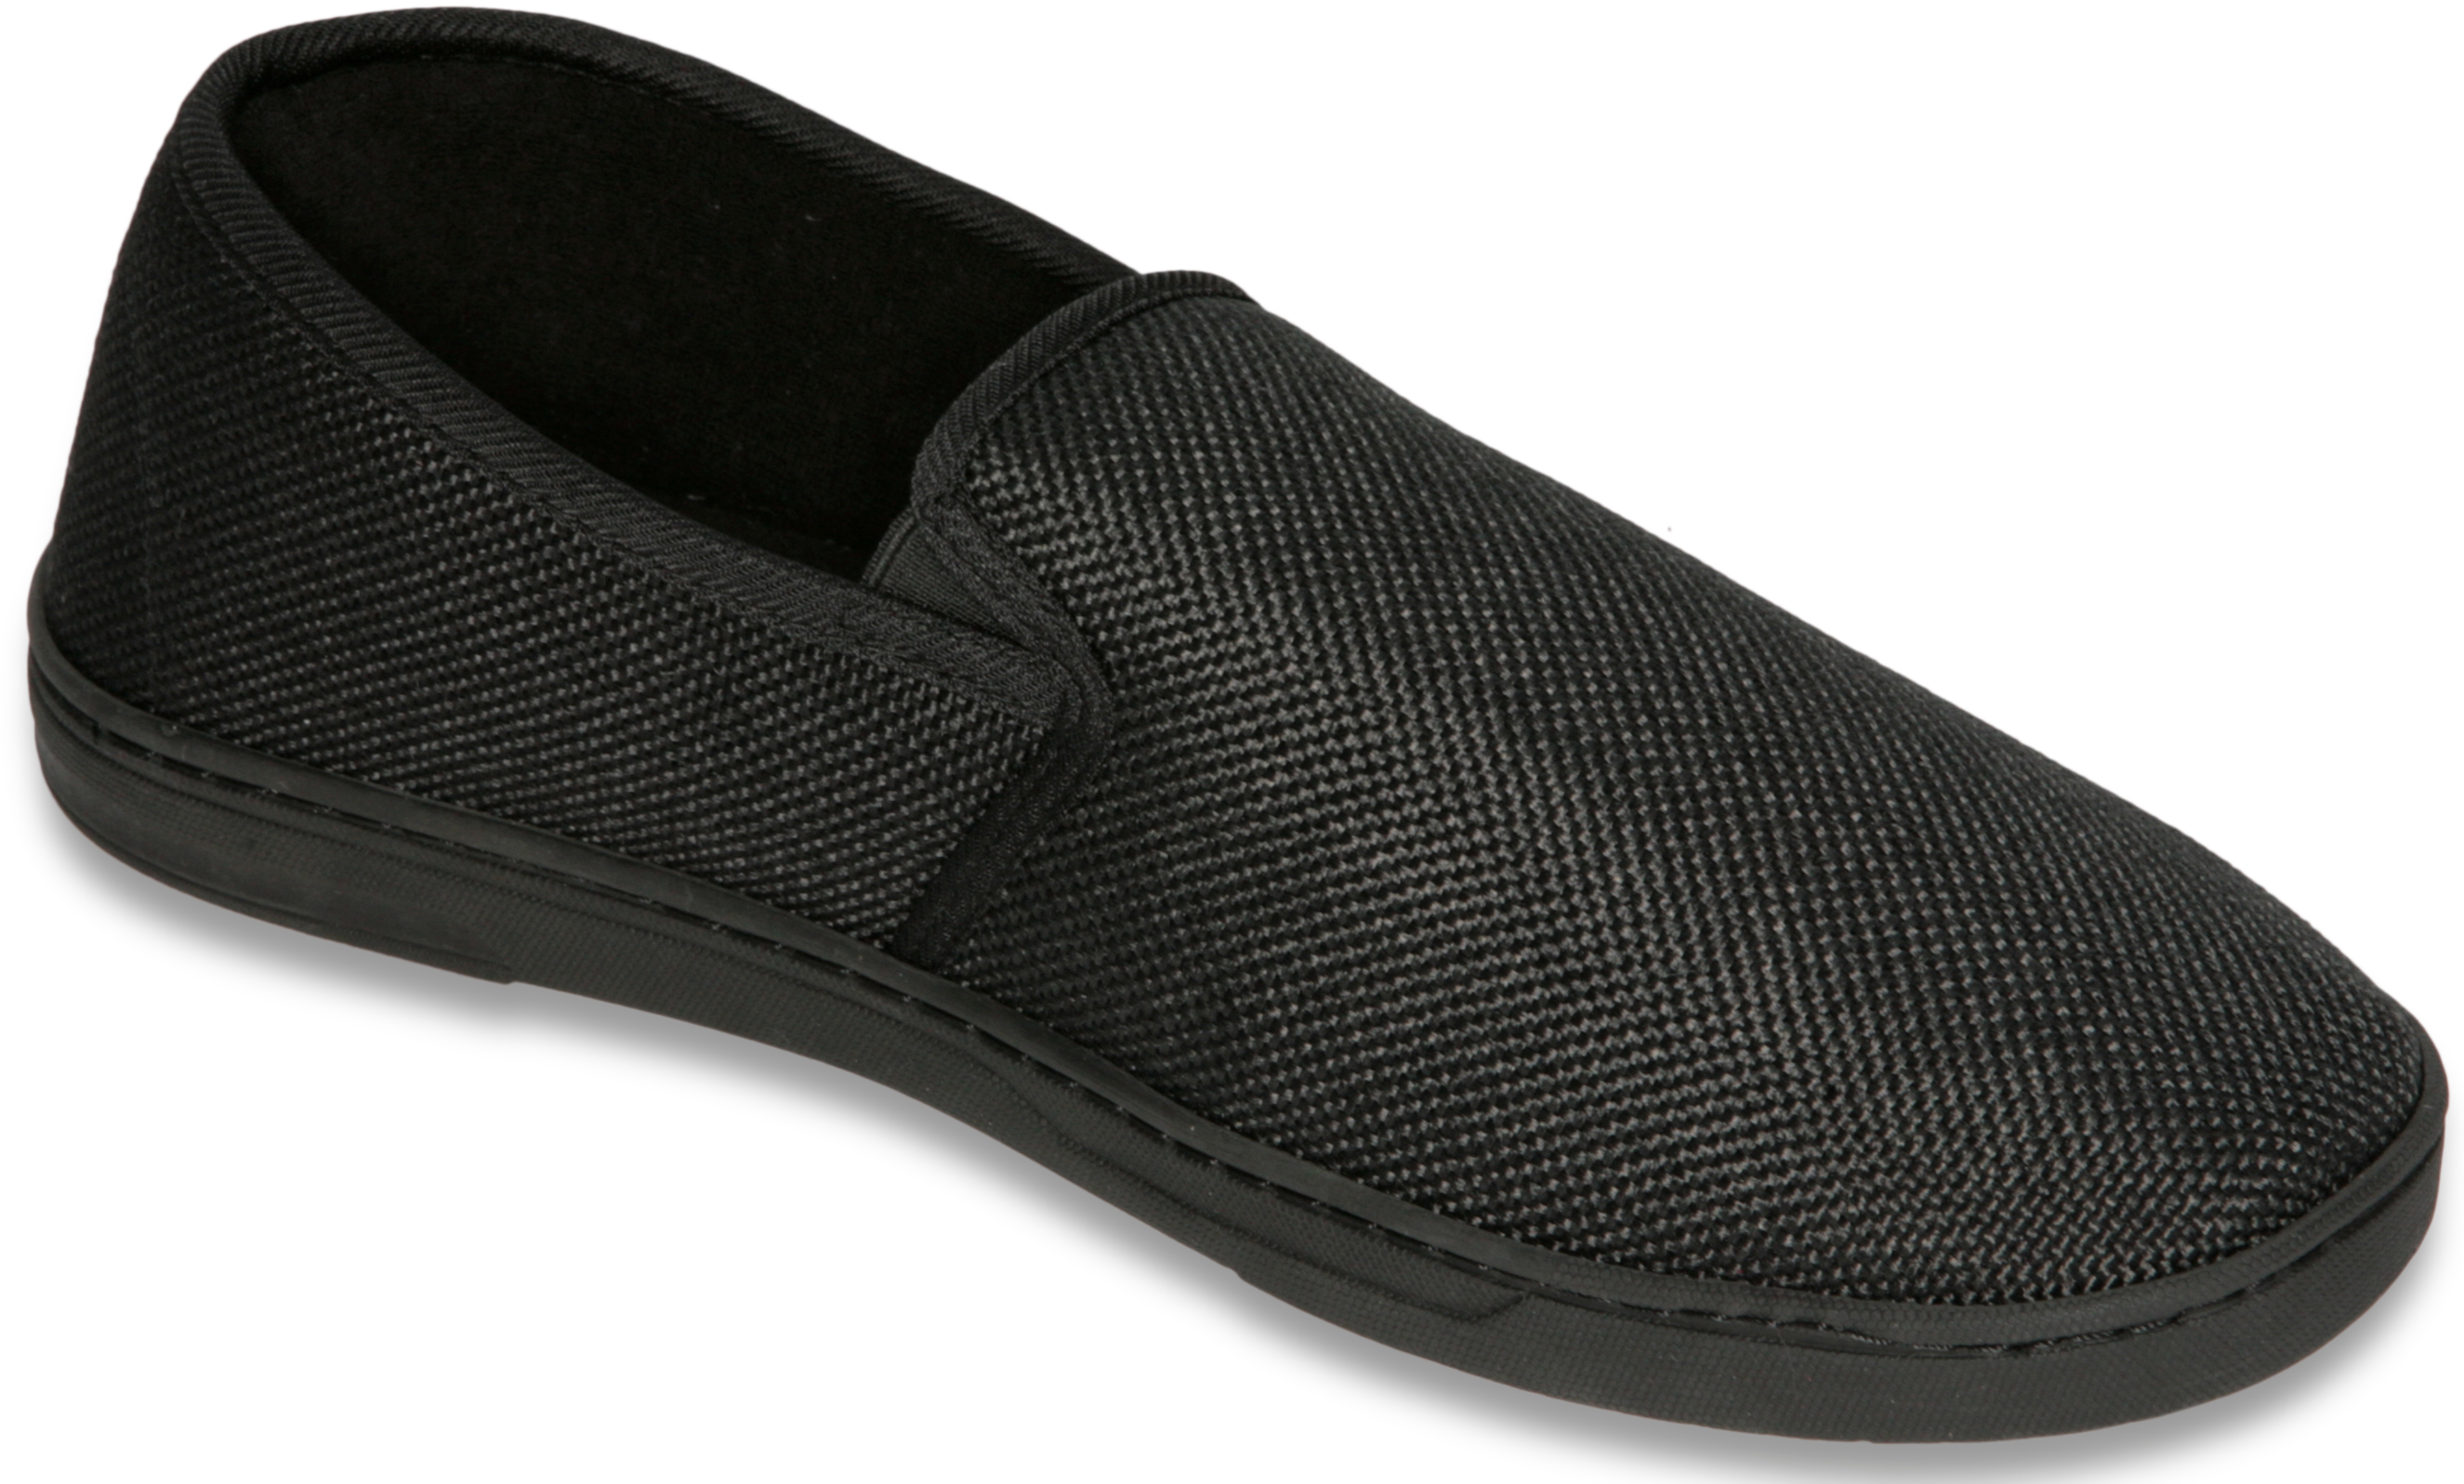 Deluxe Comfort Men's Memory Foam Slipper, Size 11-12 - Suede Vamp Checkered Lining - Memory Foam Insole - Strong TPR Outsole - Mens Slippers, Black - image 1 of 5